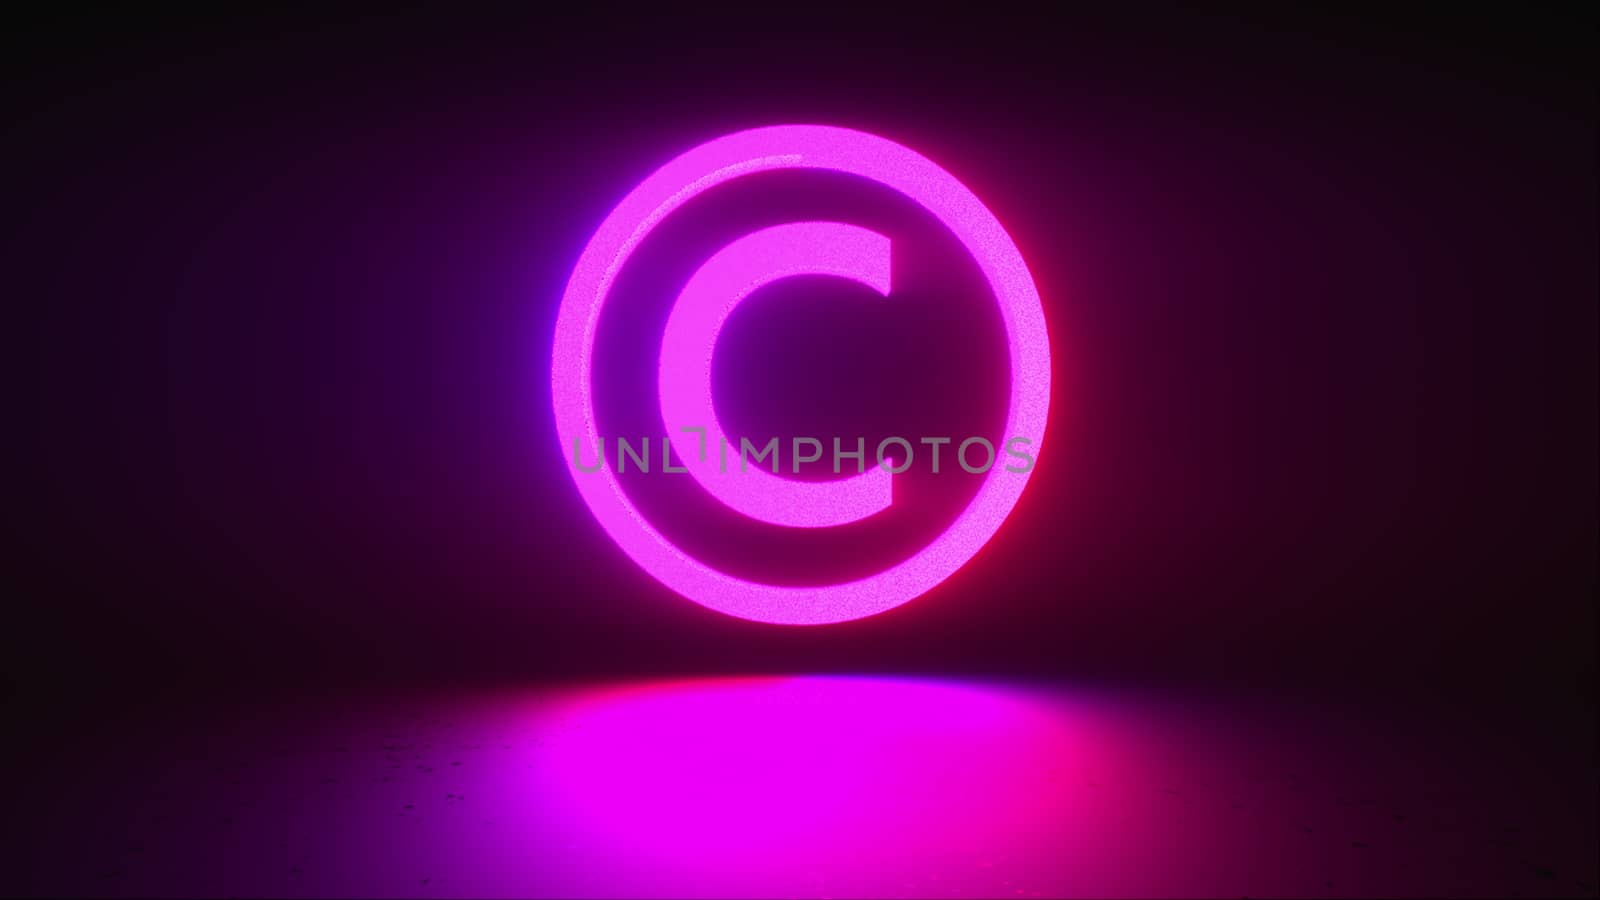 Rotating neon copyright sign on a dark background, computer generated. 3d rendering of copyright protection